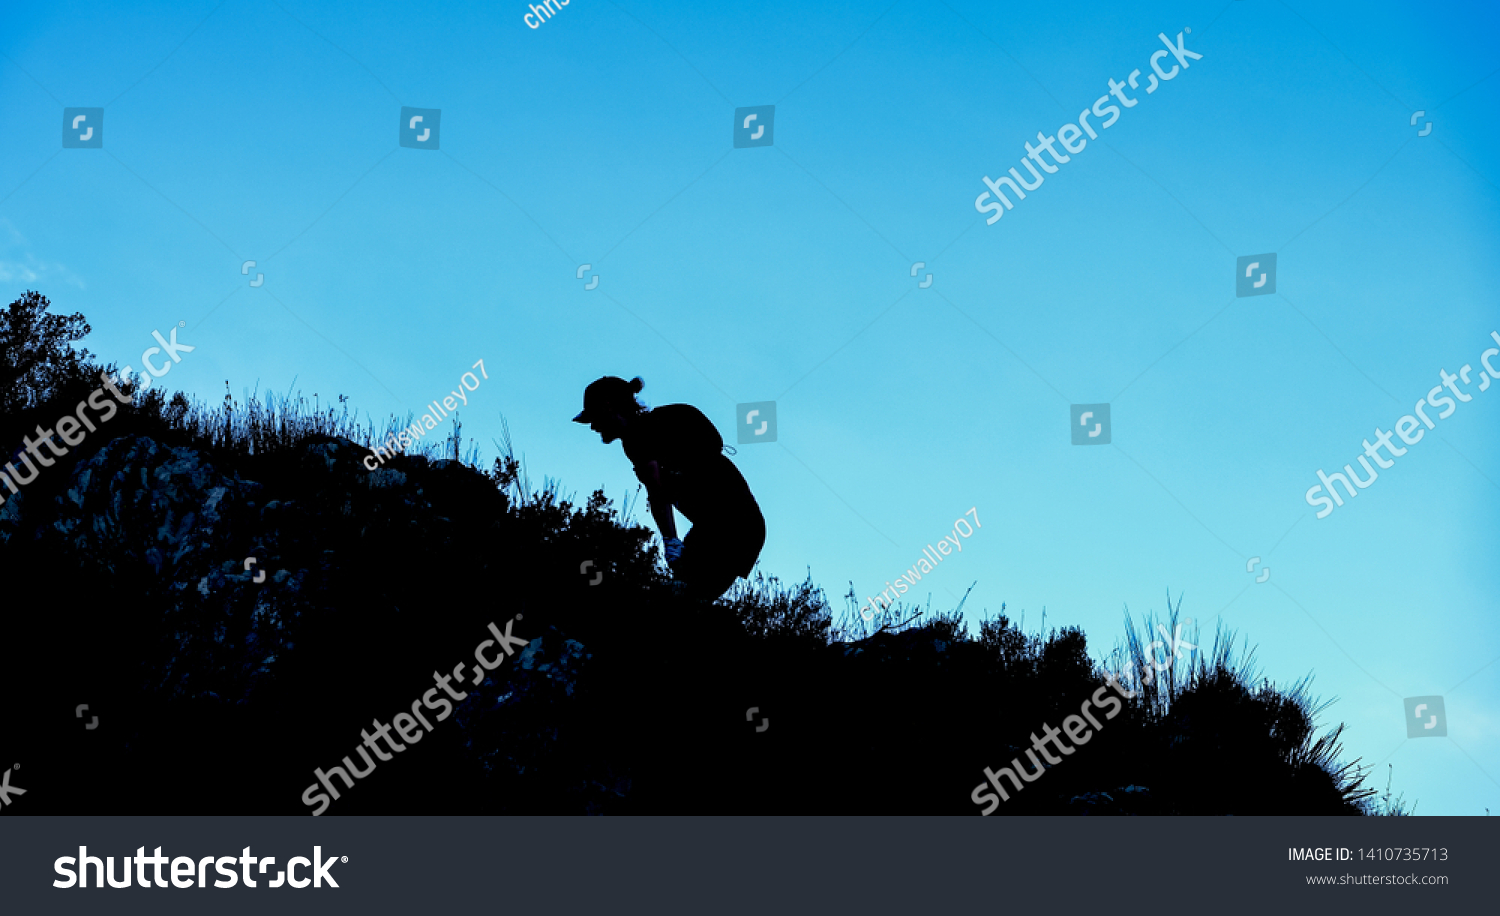 Dramatic silhouette of a person hiking and climbing a steep mountain #1410735713